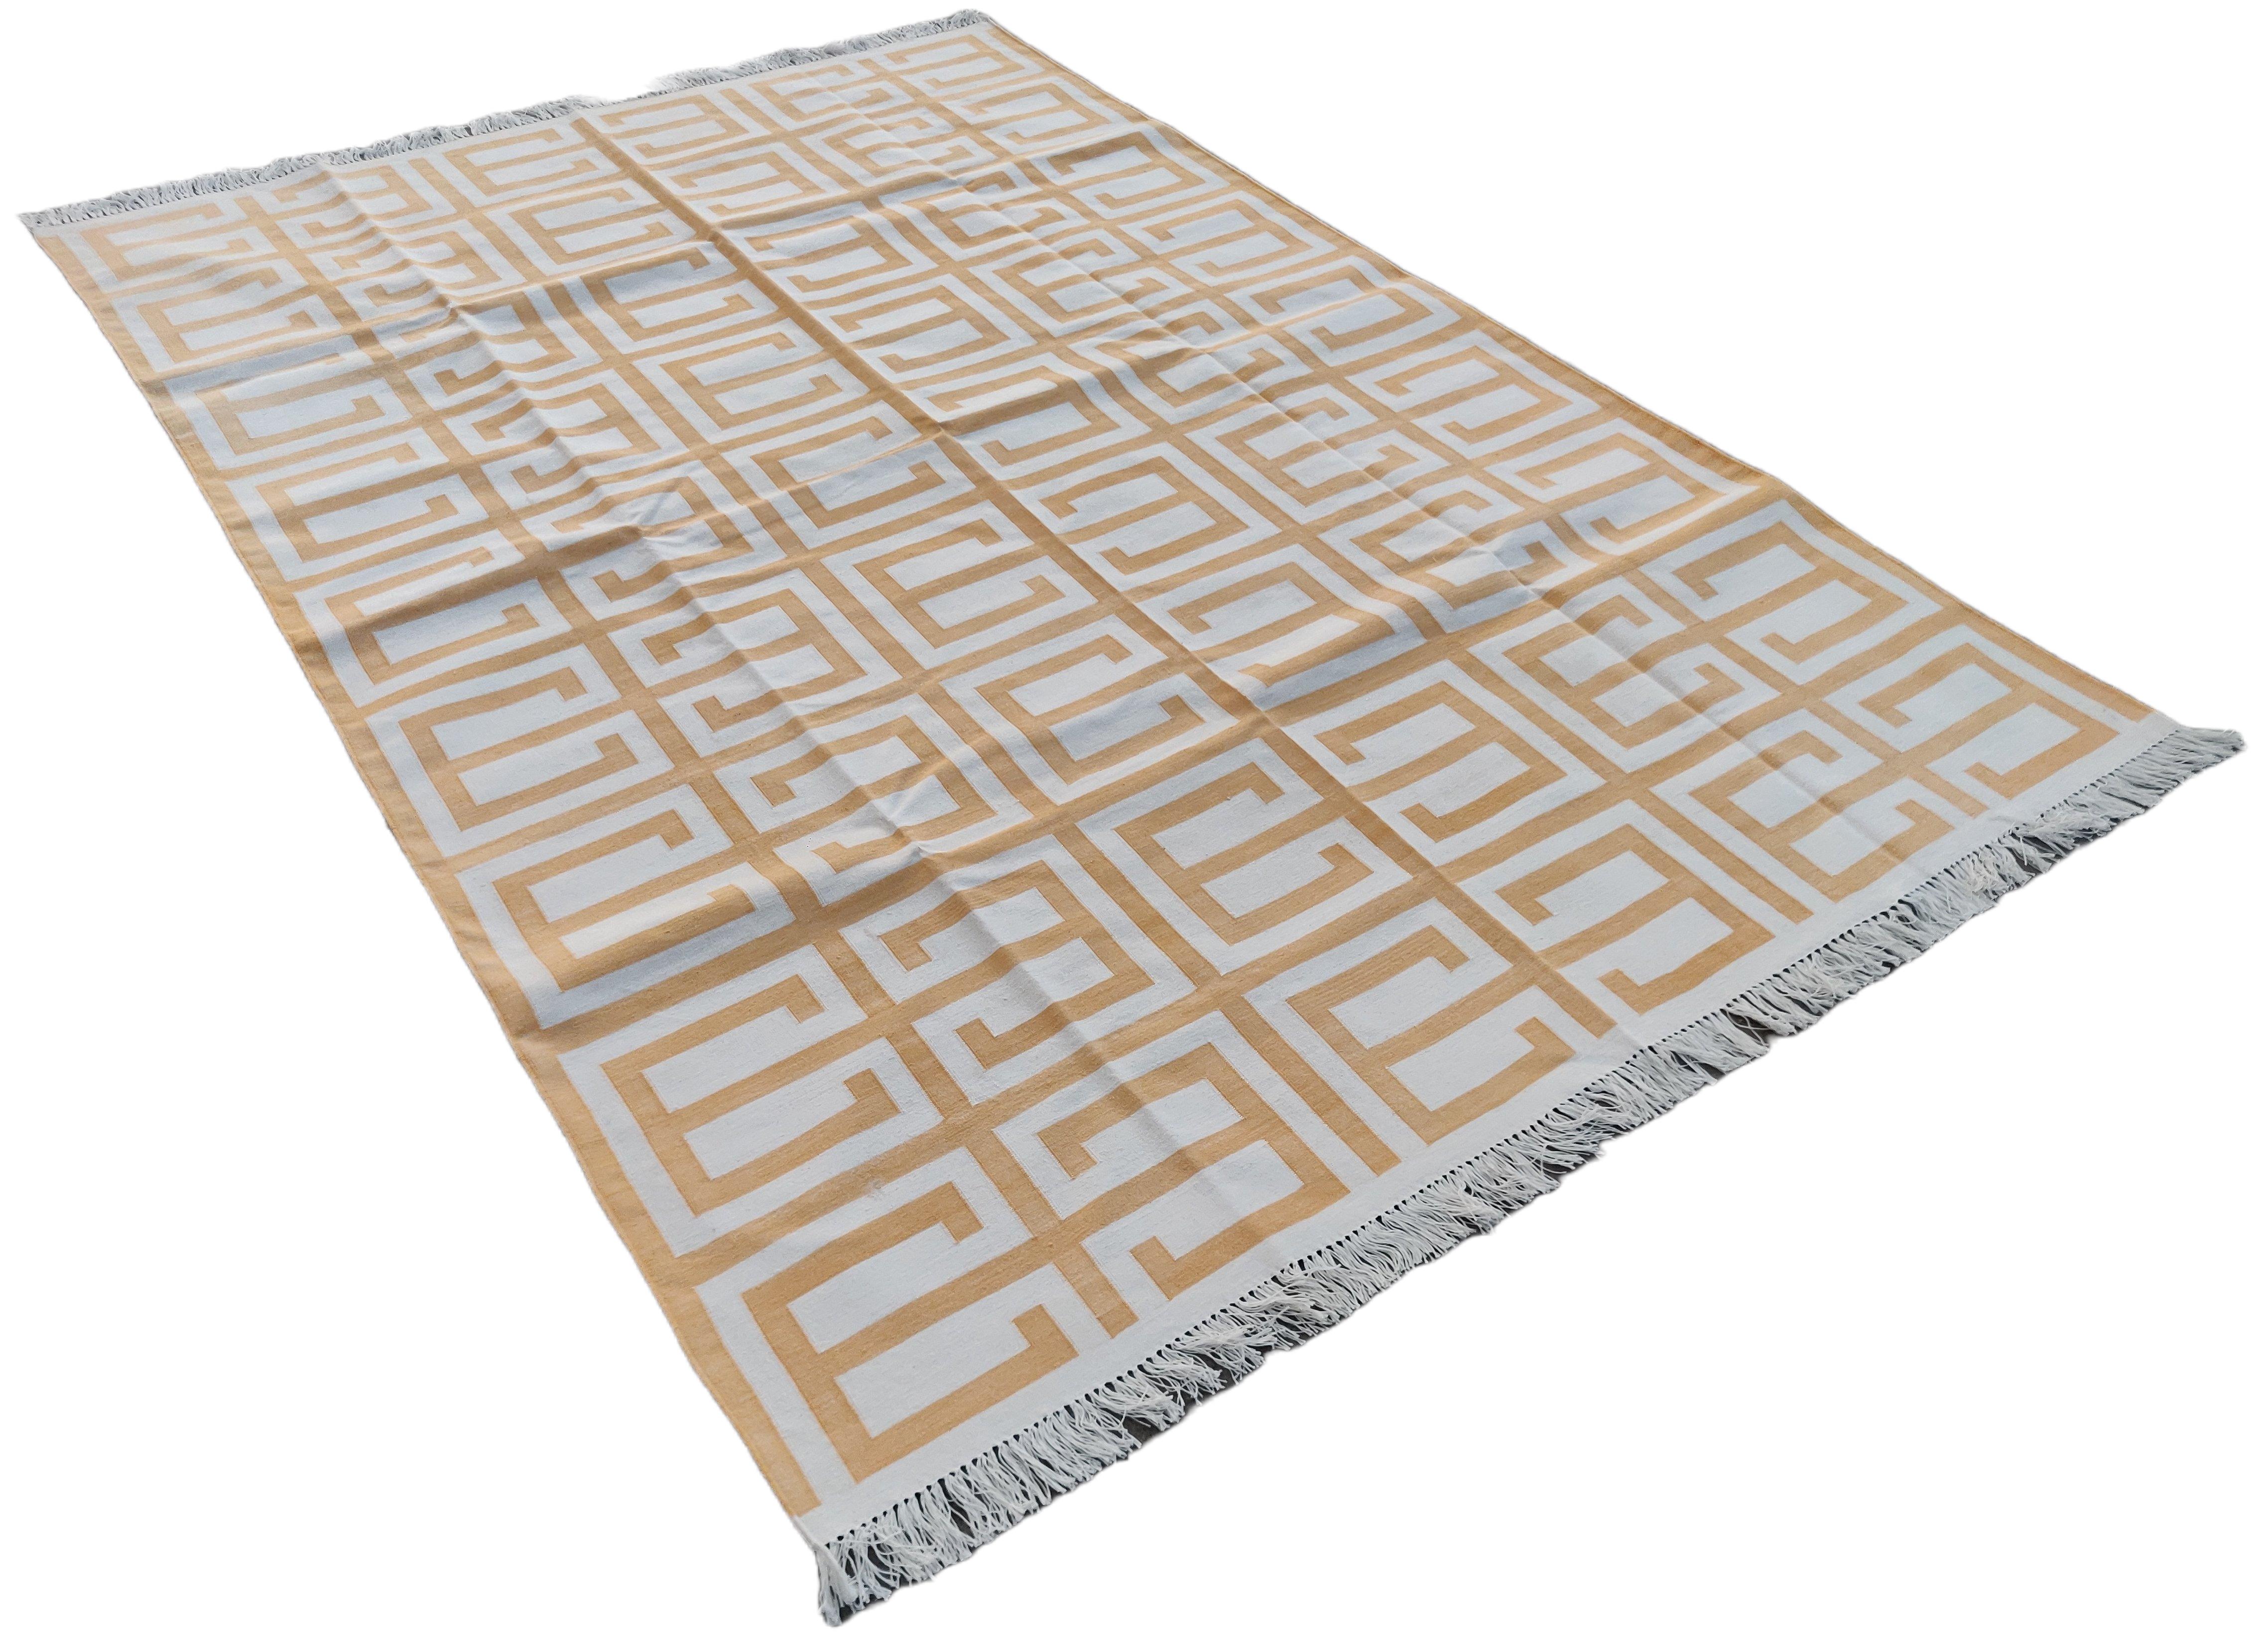 Cotton Vegetable Dyed Yellow And Cream Geometric Indian Dhurrie Rug-6'x9' 
These special flat-weave dhurries are hand-woven with 15 ply 100% cotton yarn. Due to the special manufacturing techniques used to create our rugs, the size and color of each